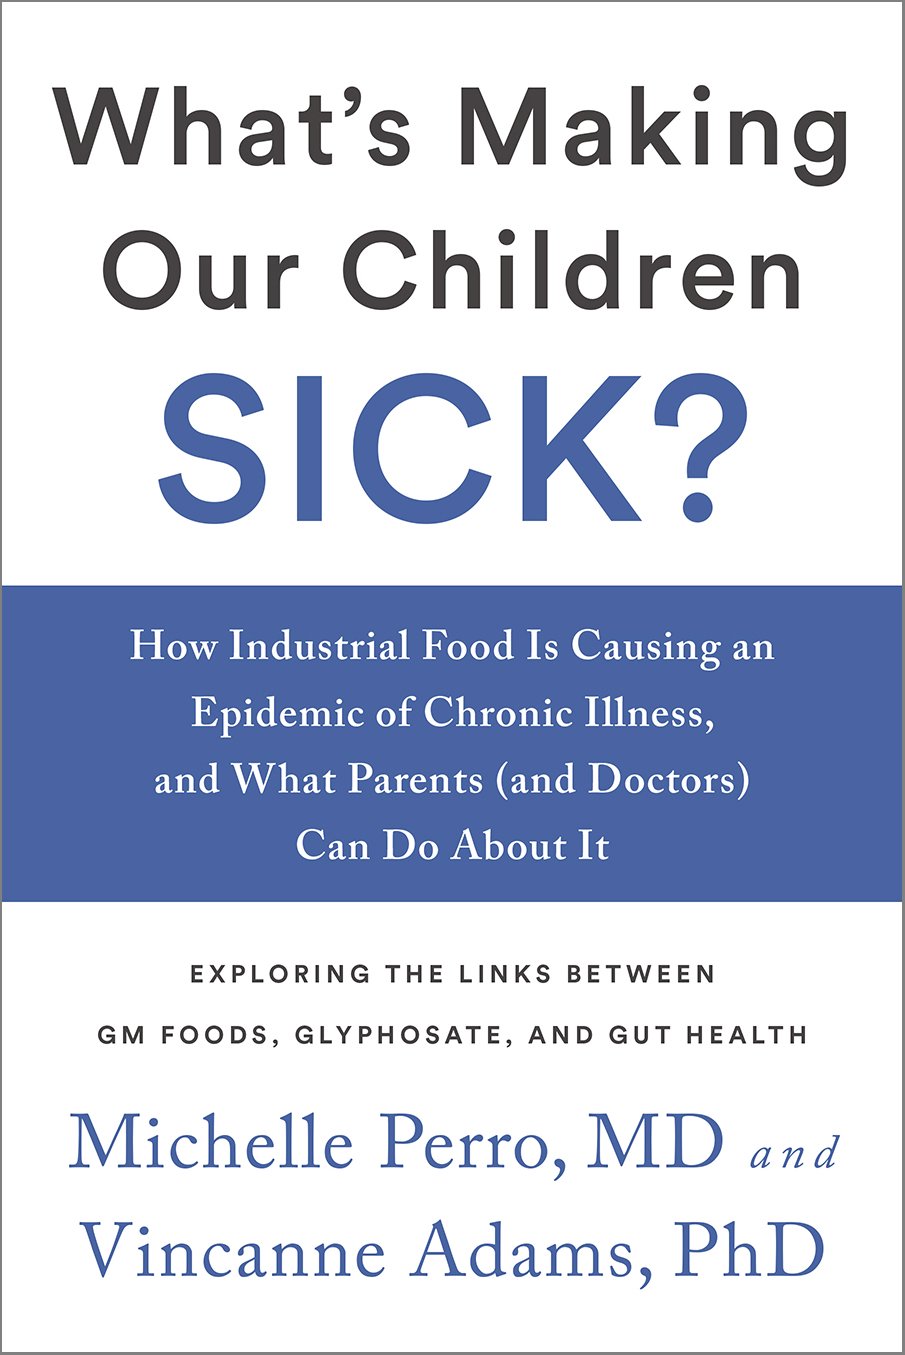 What’s Making Our Children Sick?